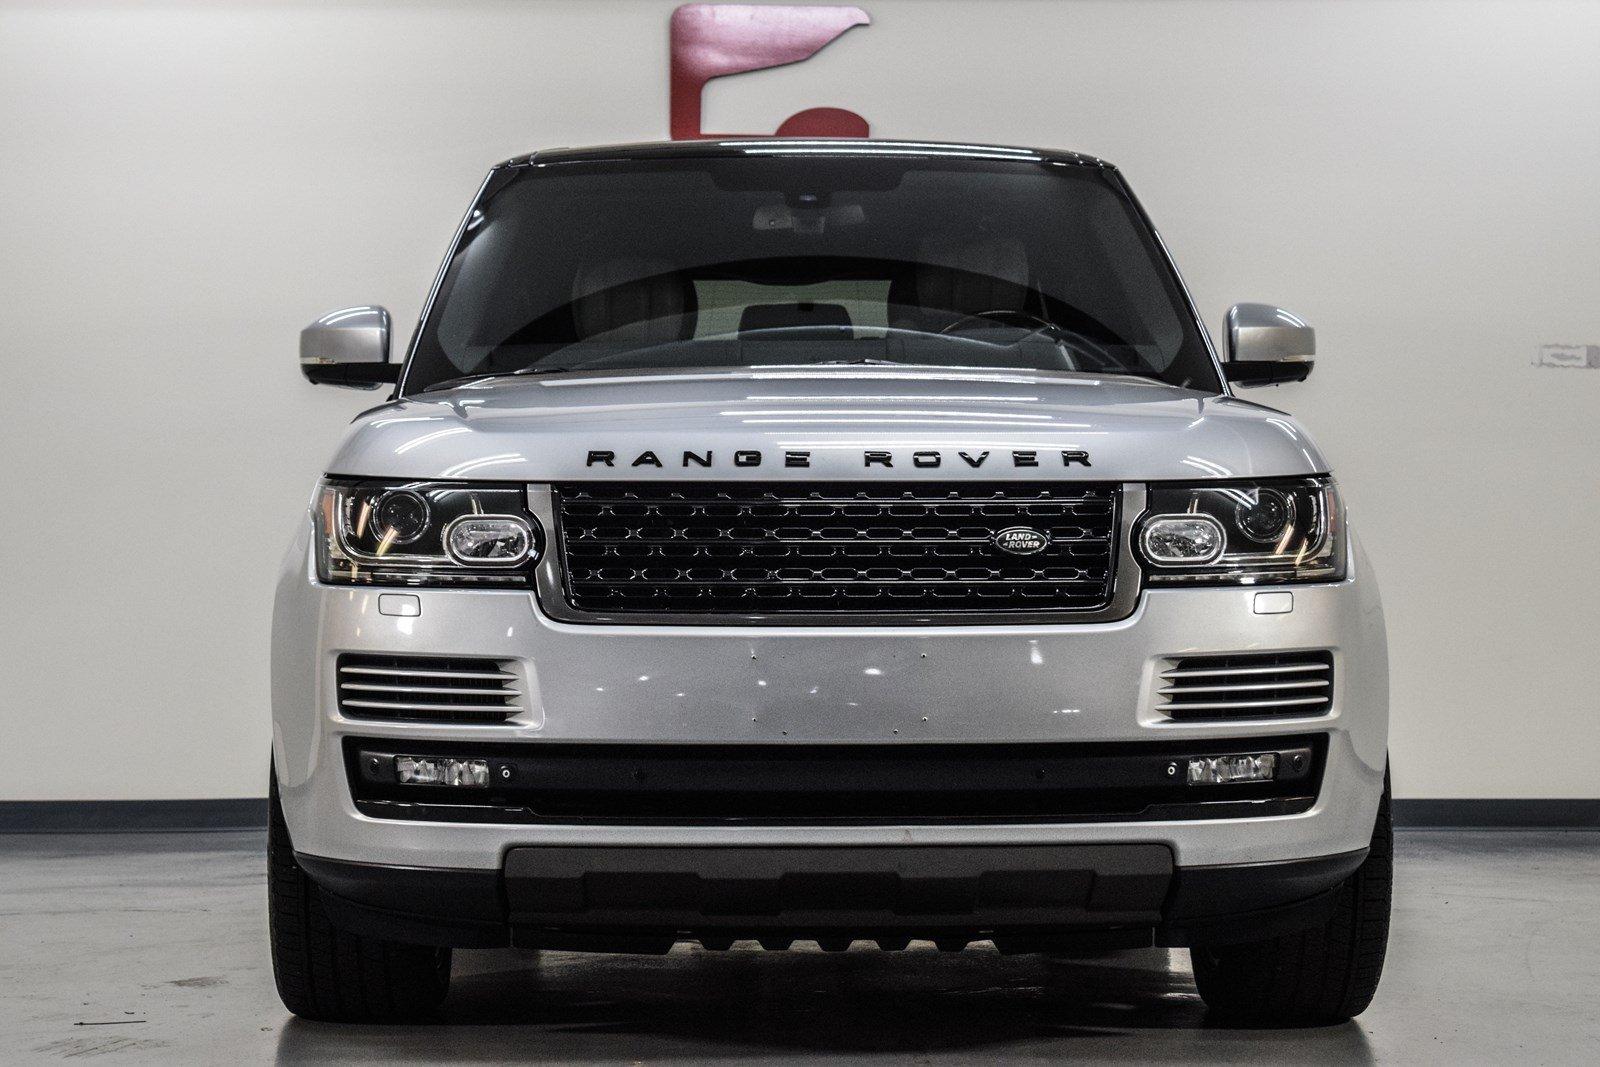 Used 2014 Land Rover Range Rover Supercharged for sale Sold at Gravity Autos Marietta in Marietta GA 30060 6